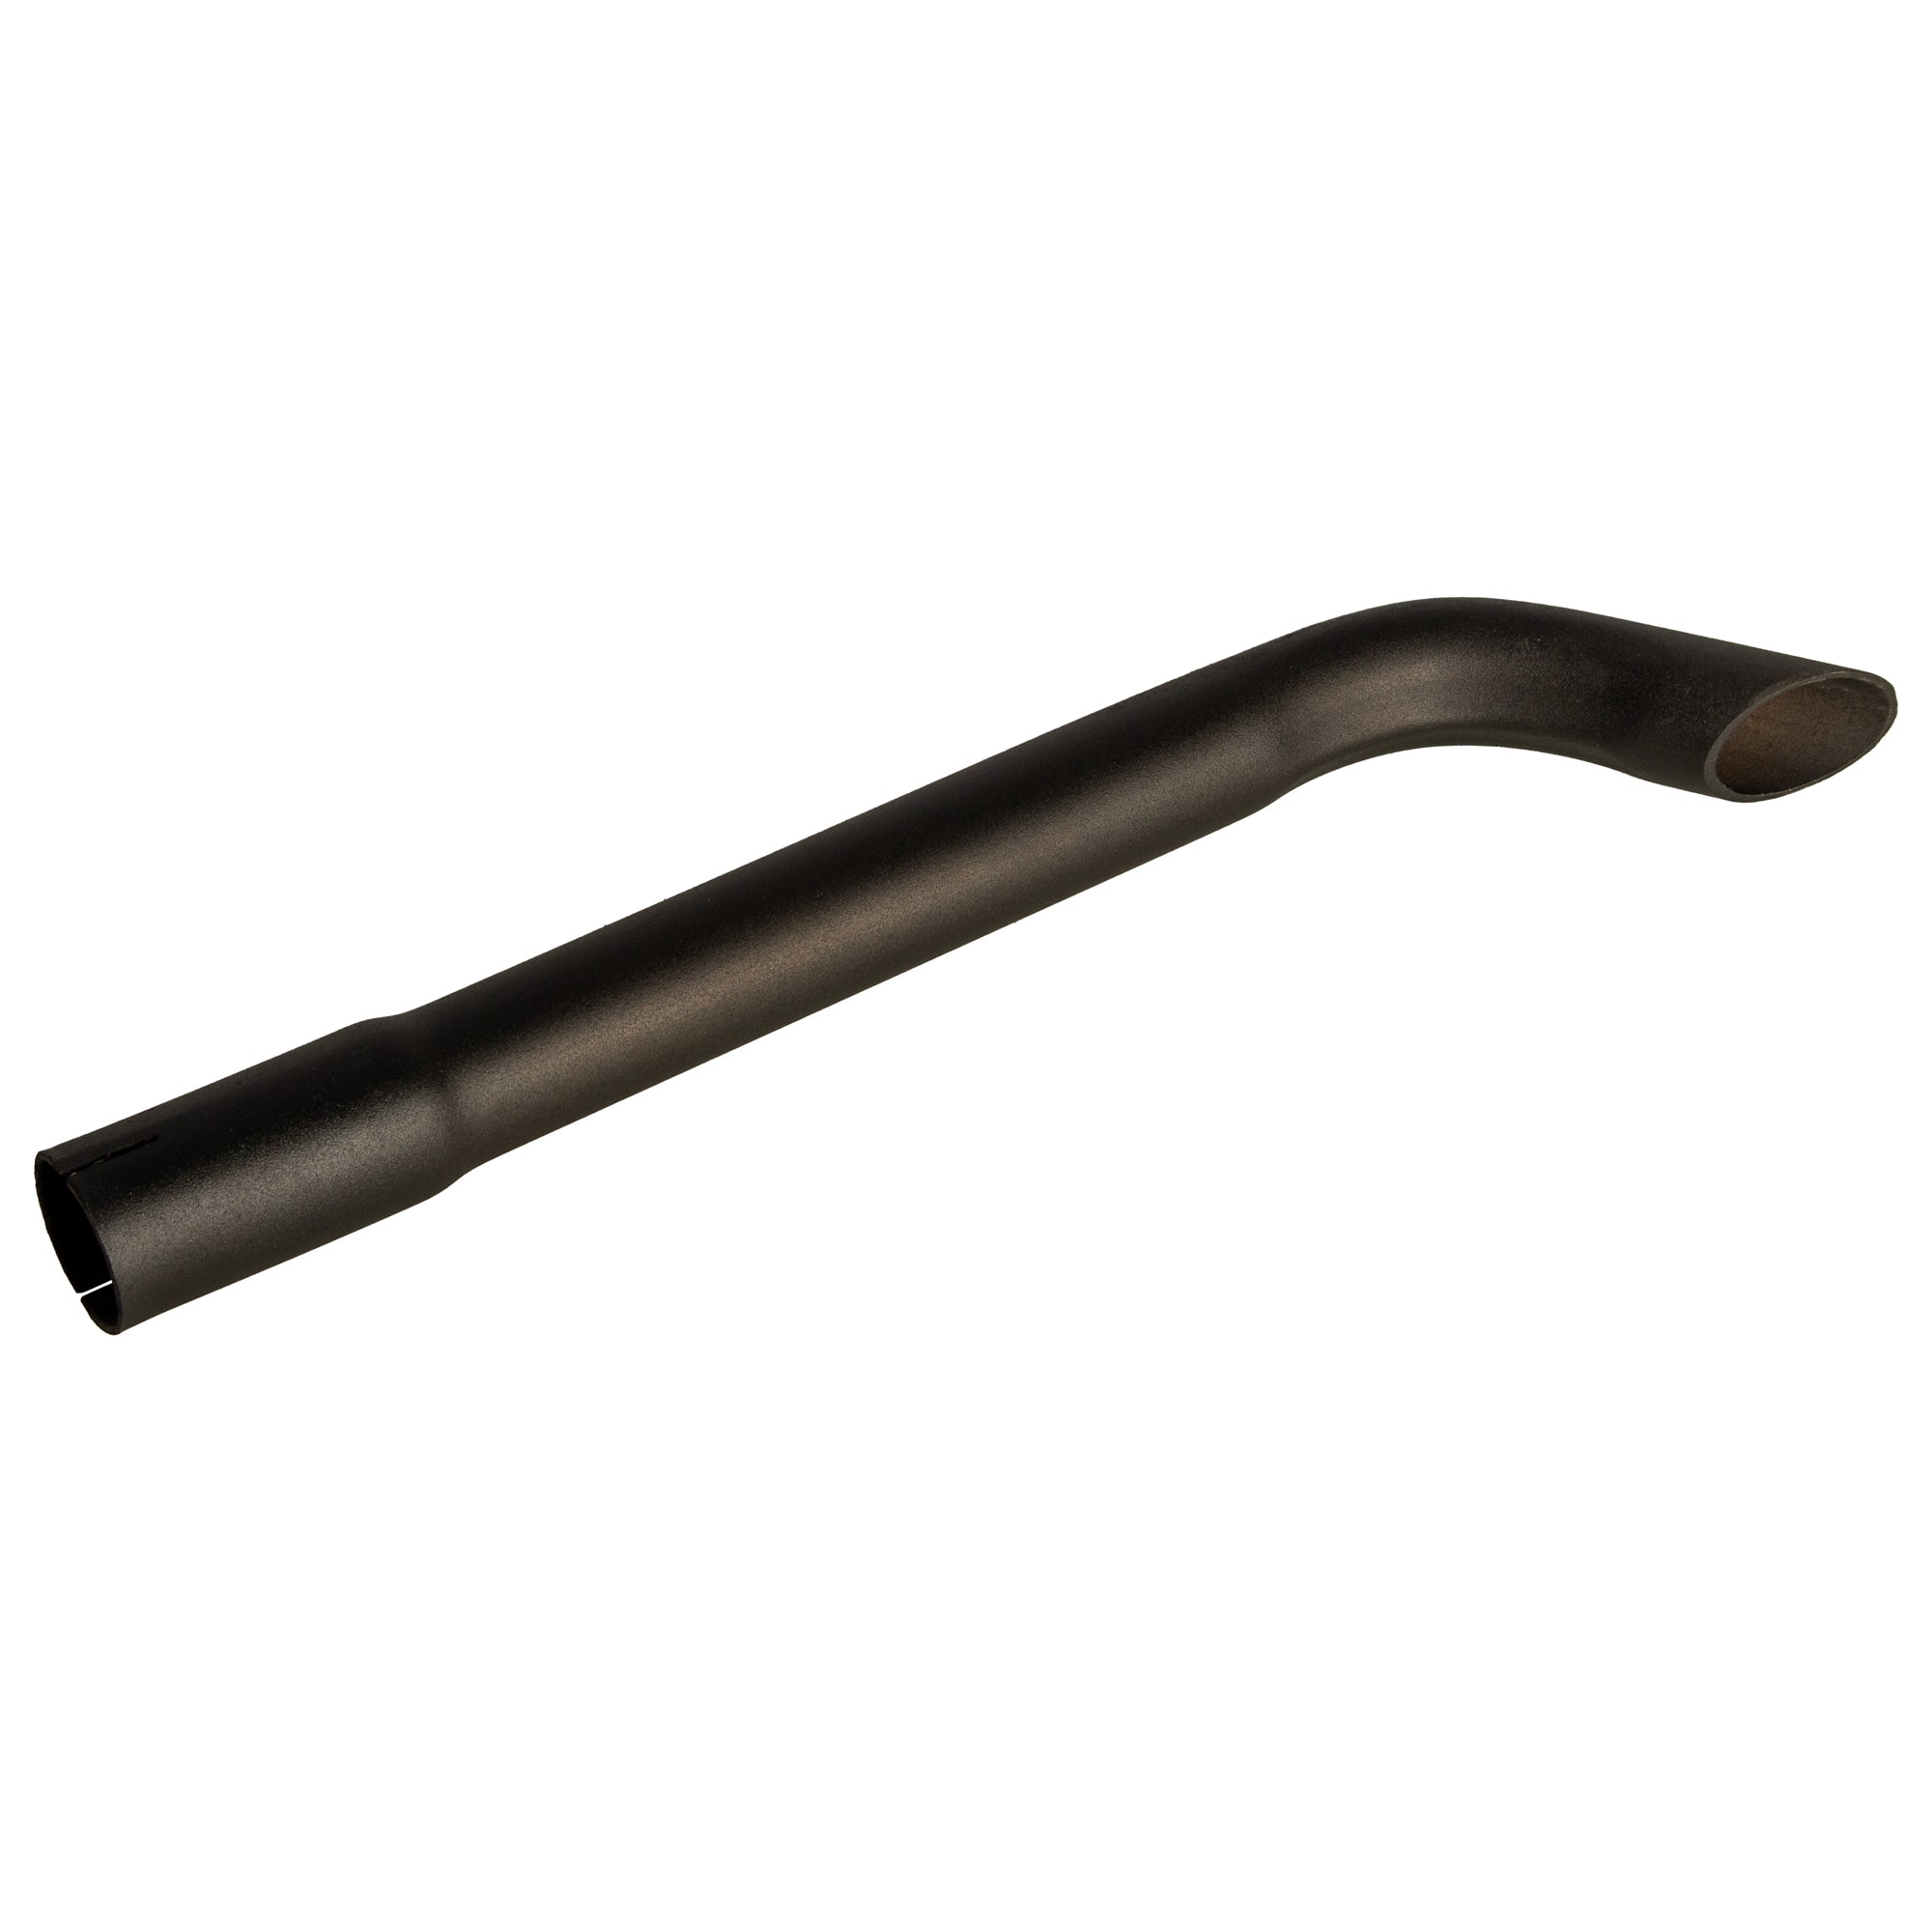 1" x 12" Bended End Pipe Black Exhaust Stack Replacement for UNIVERSAL